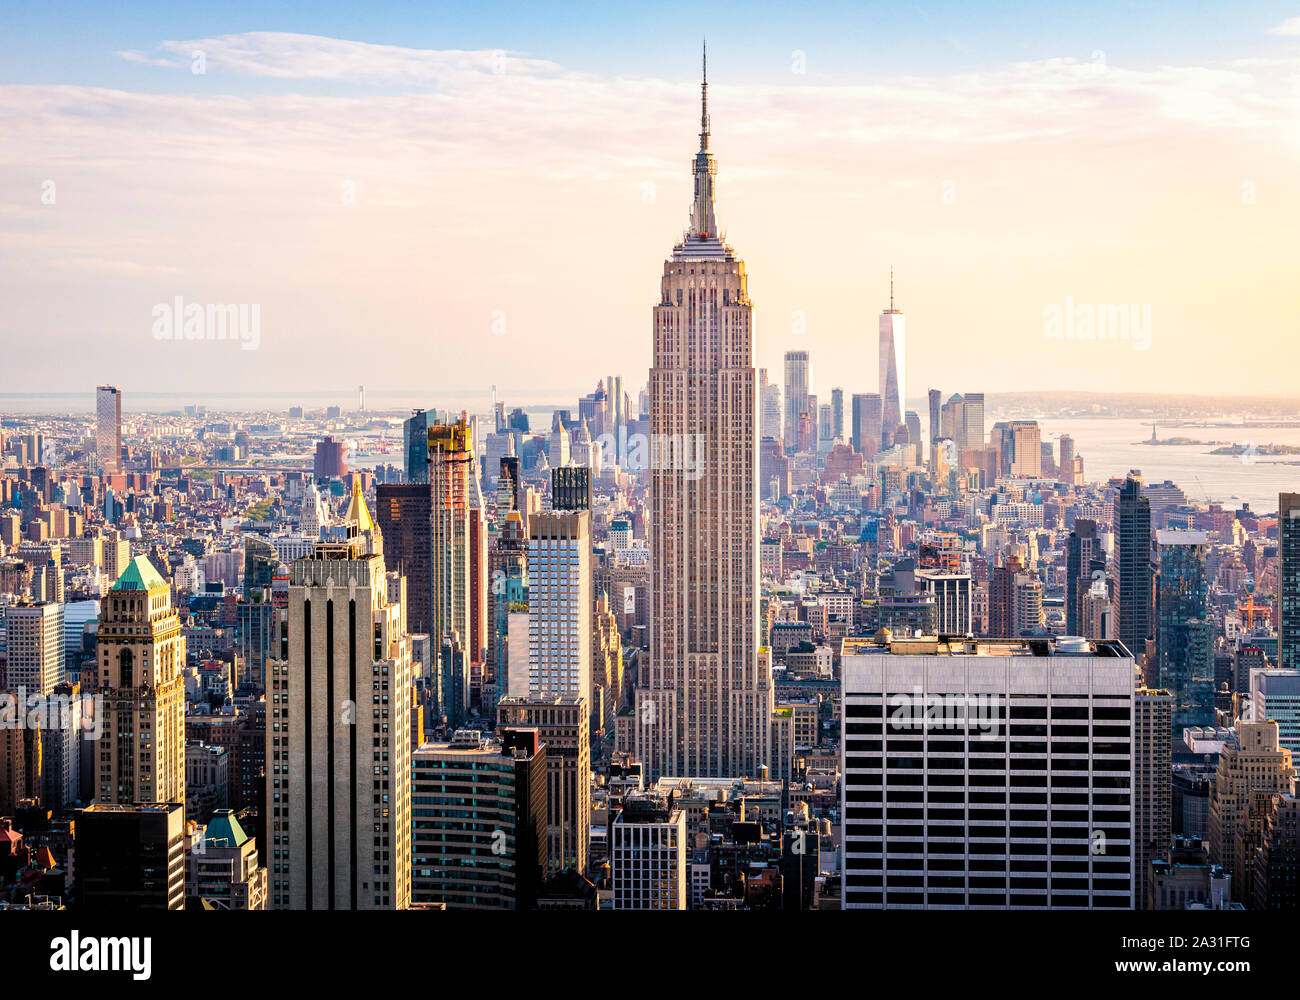 The Empire State Building towers over Manhattan in New York City, USA. Stock Photo